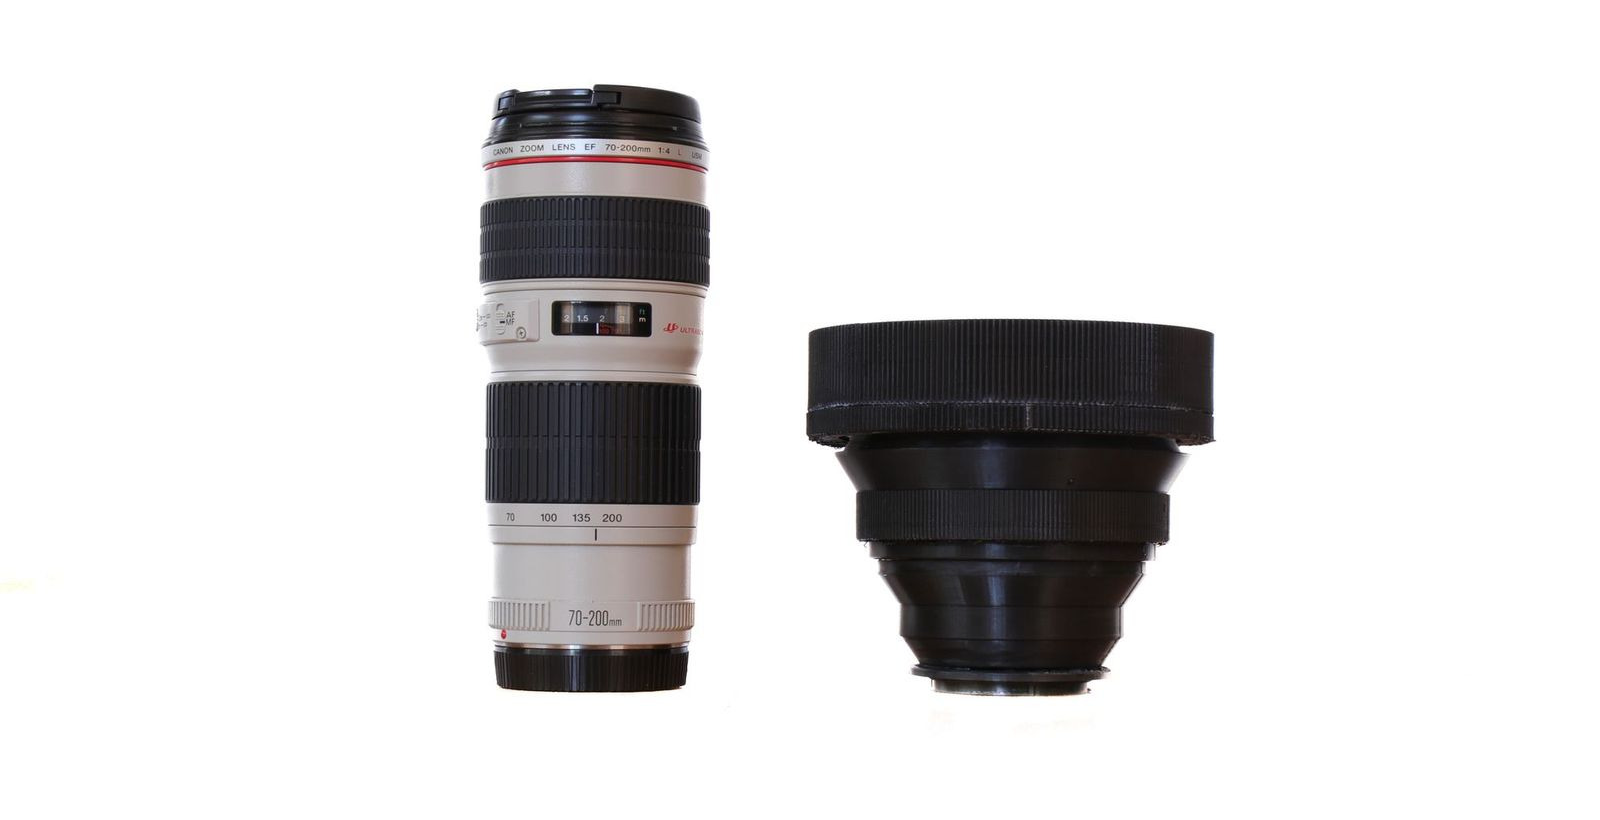 3d printed canon ef lens